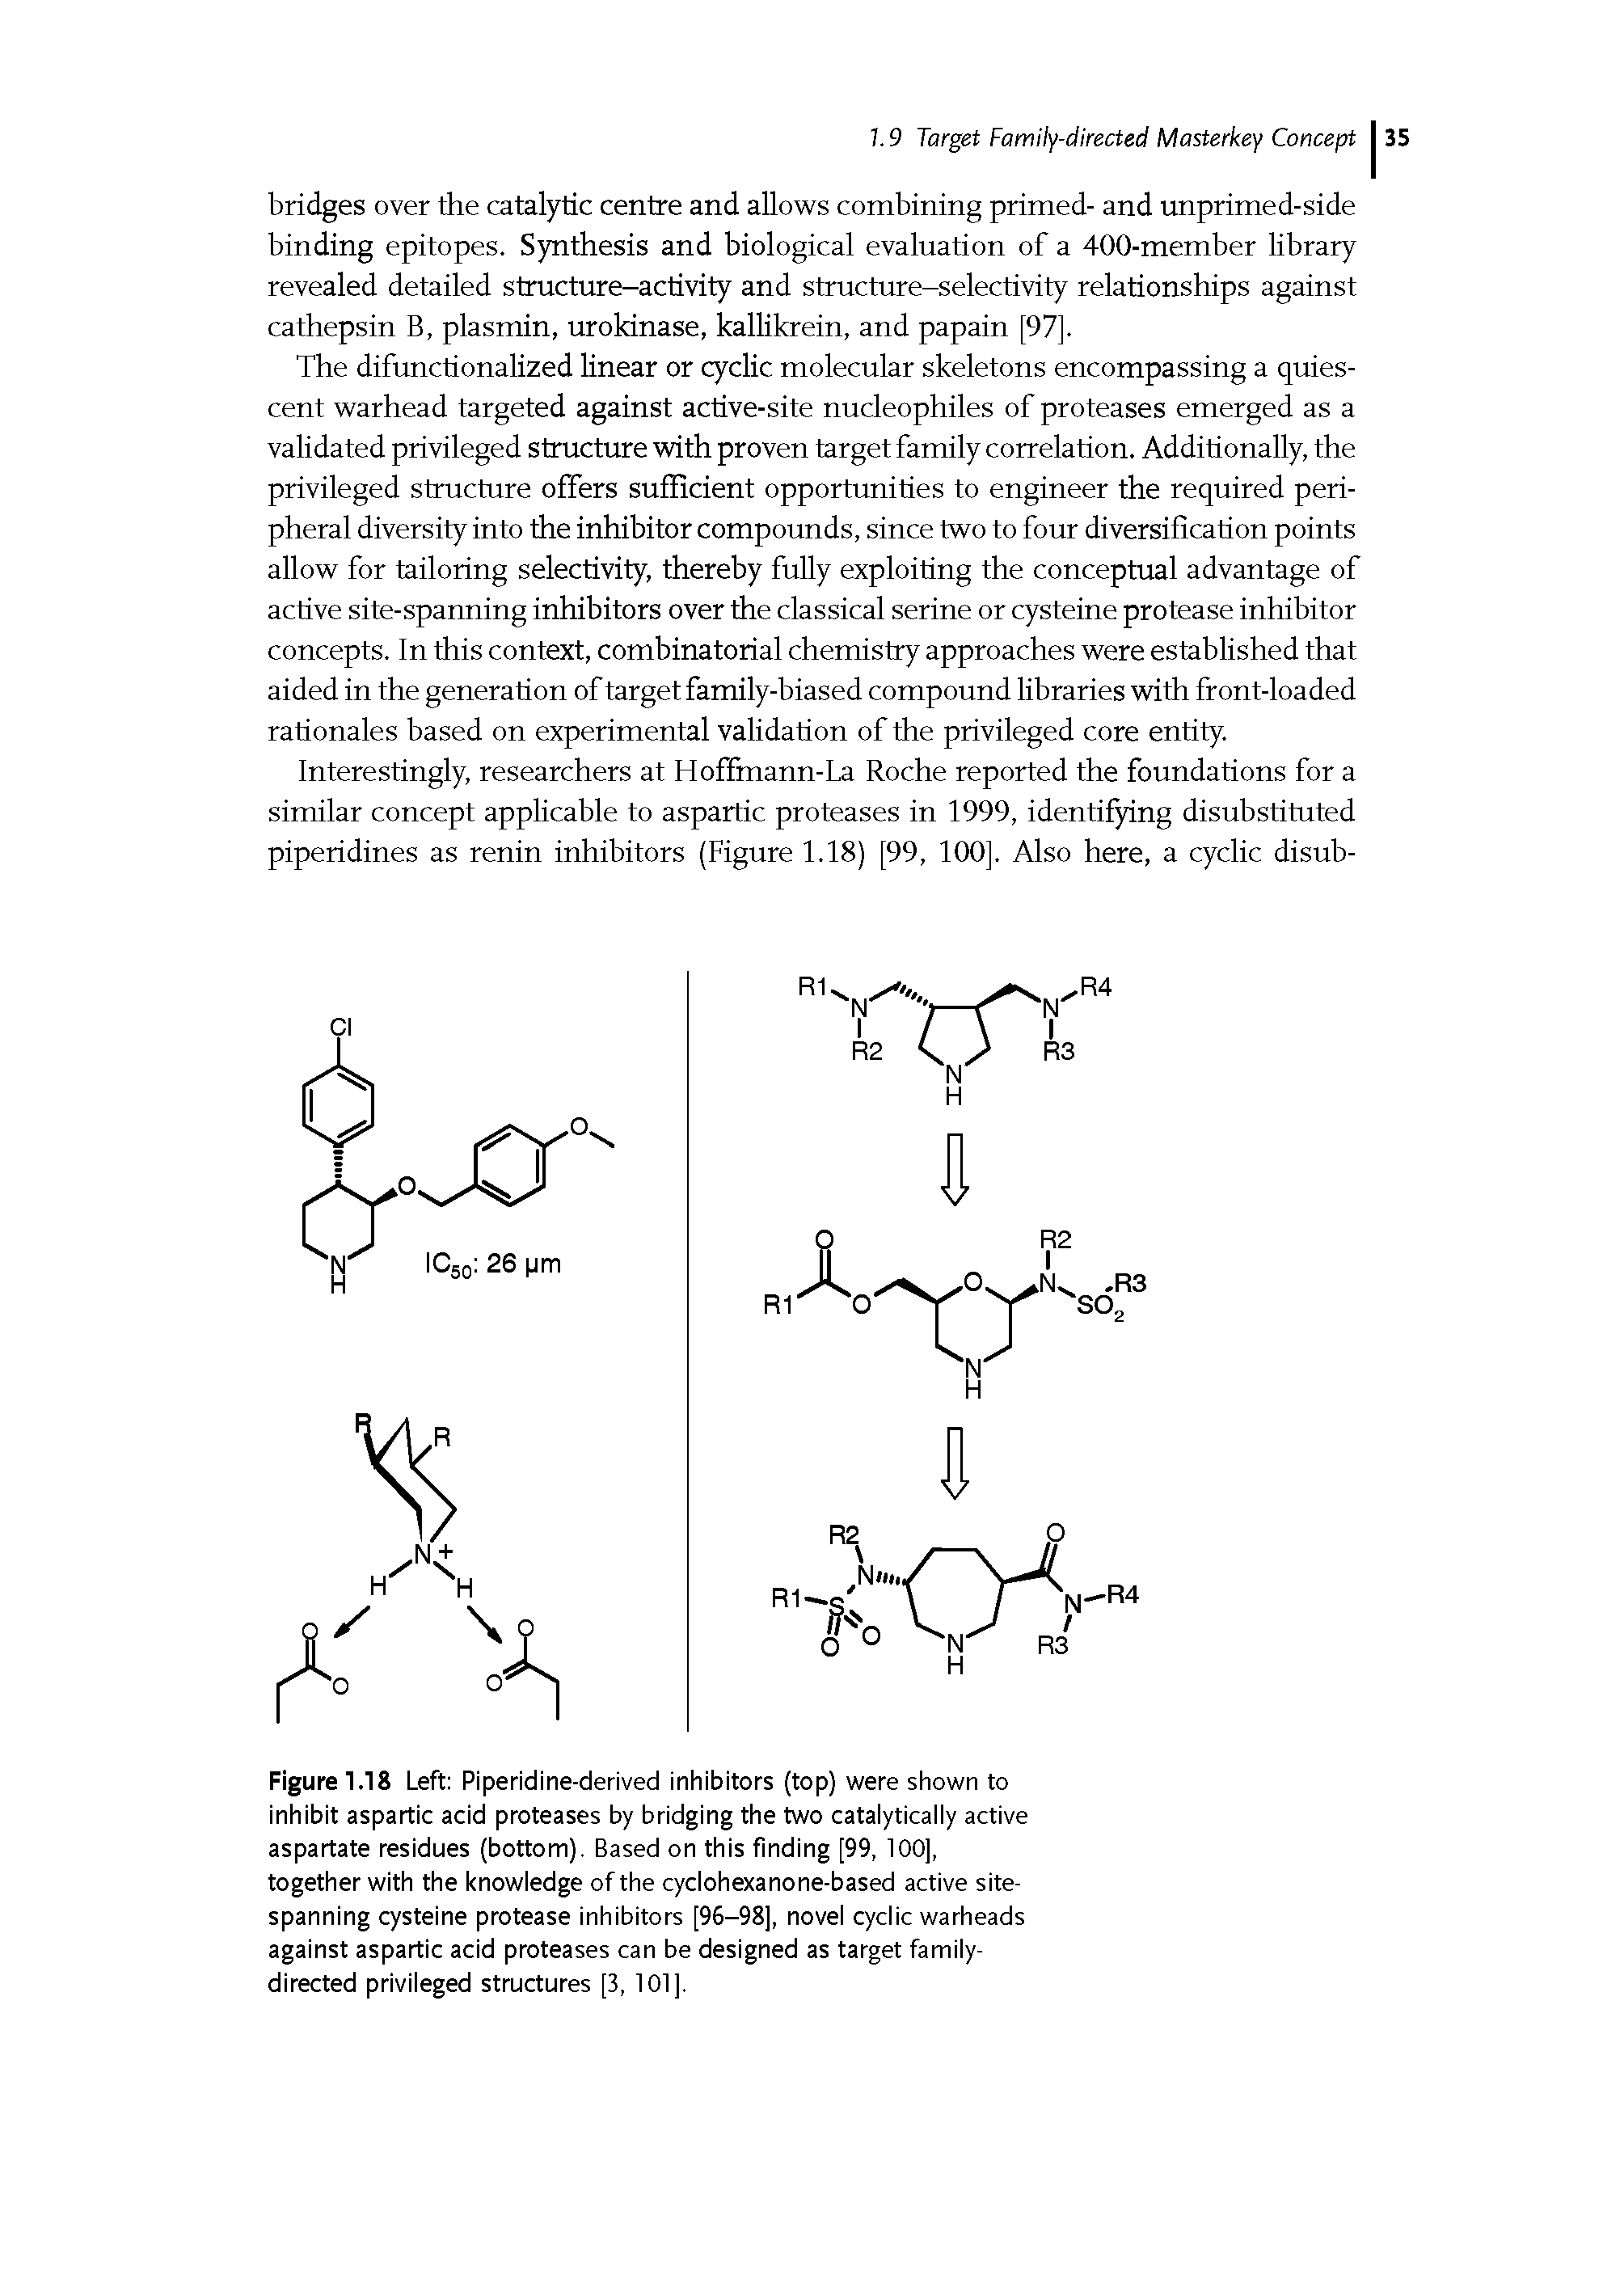 Figure 1.18 Left Piperidine-derived inhibitors (top) were shown to inhibit aspartic acid proteases by bridging the two catalytically active aspartate residues (bottom). Based on this finding [99, 100], together with the knowledge of the cyclohexanone-based active site-spanning cysteine protease inhibitors [96-98], novel cyclic warheads against aspartic acid proteases can be designed as target family-directed privileged structures [3, 101],...